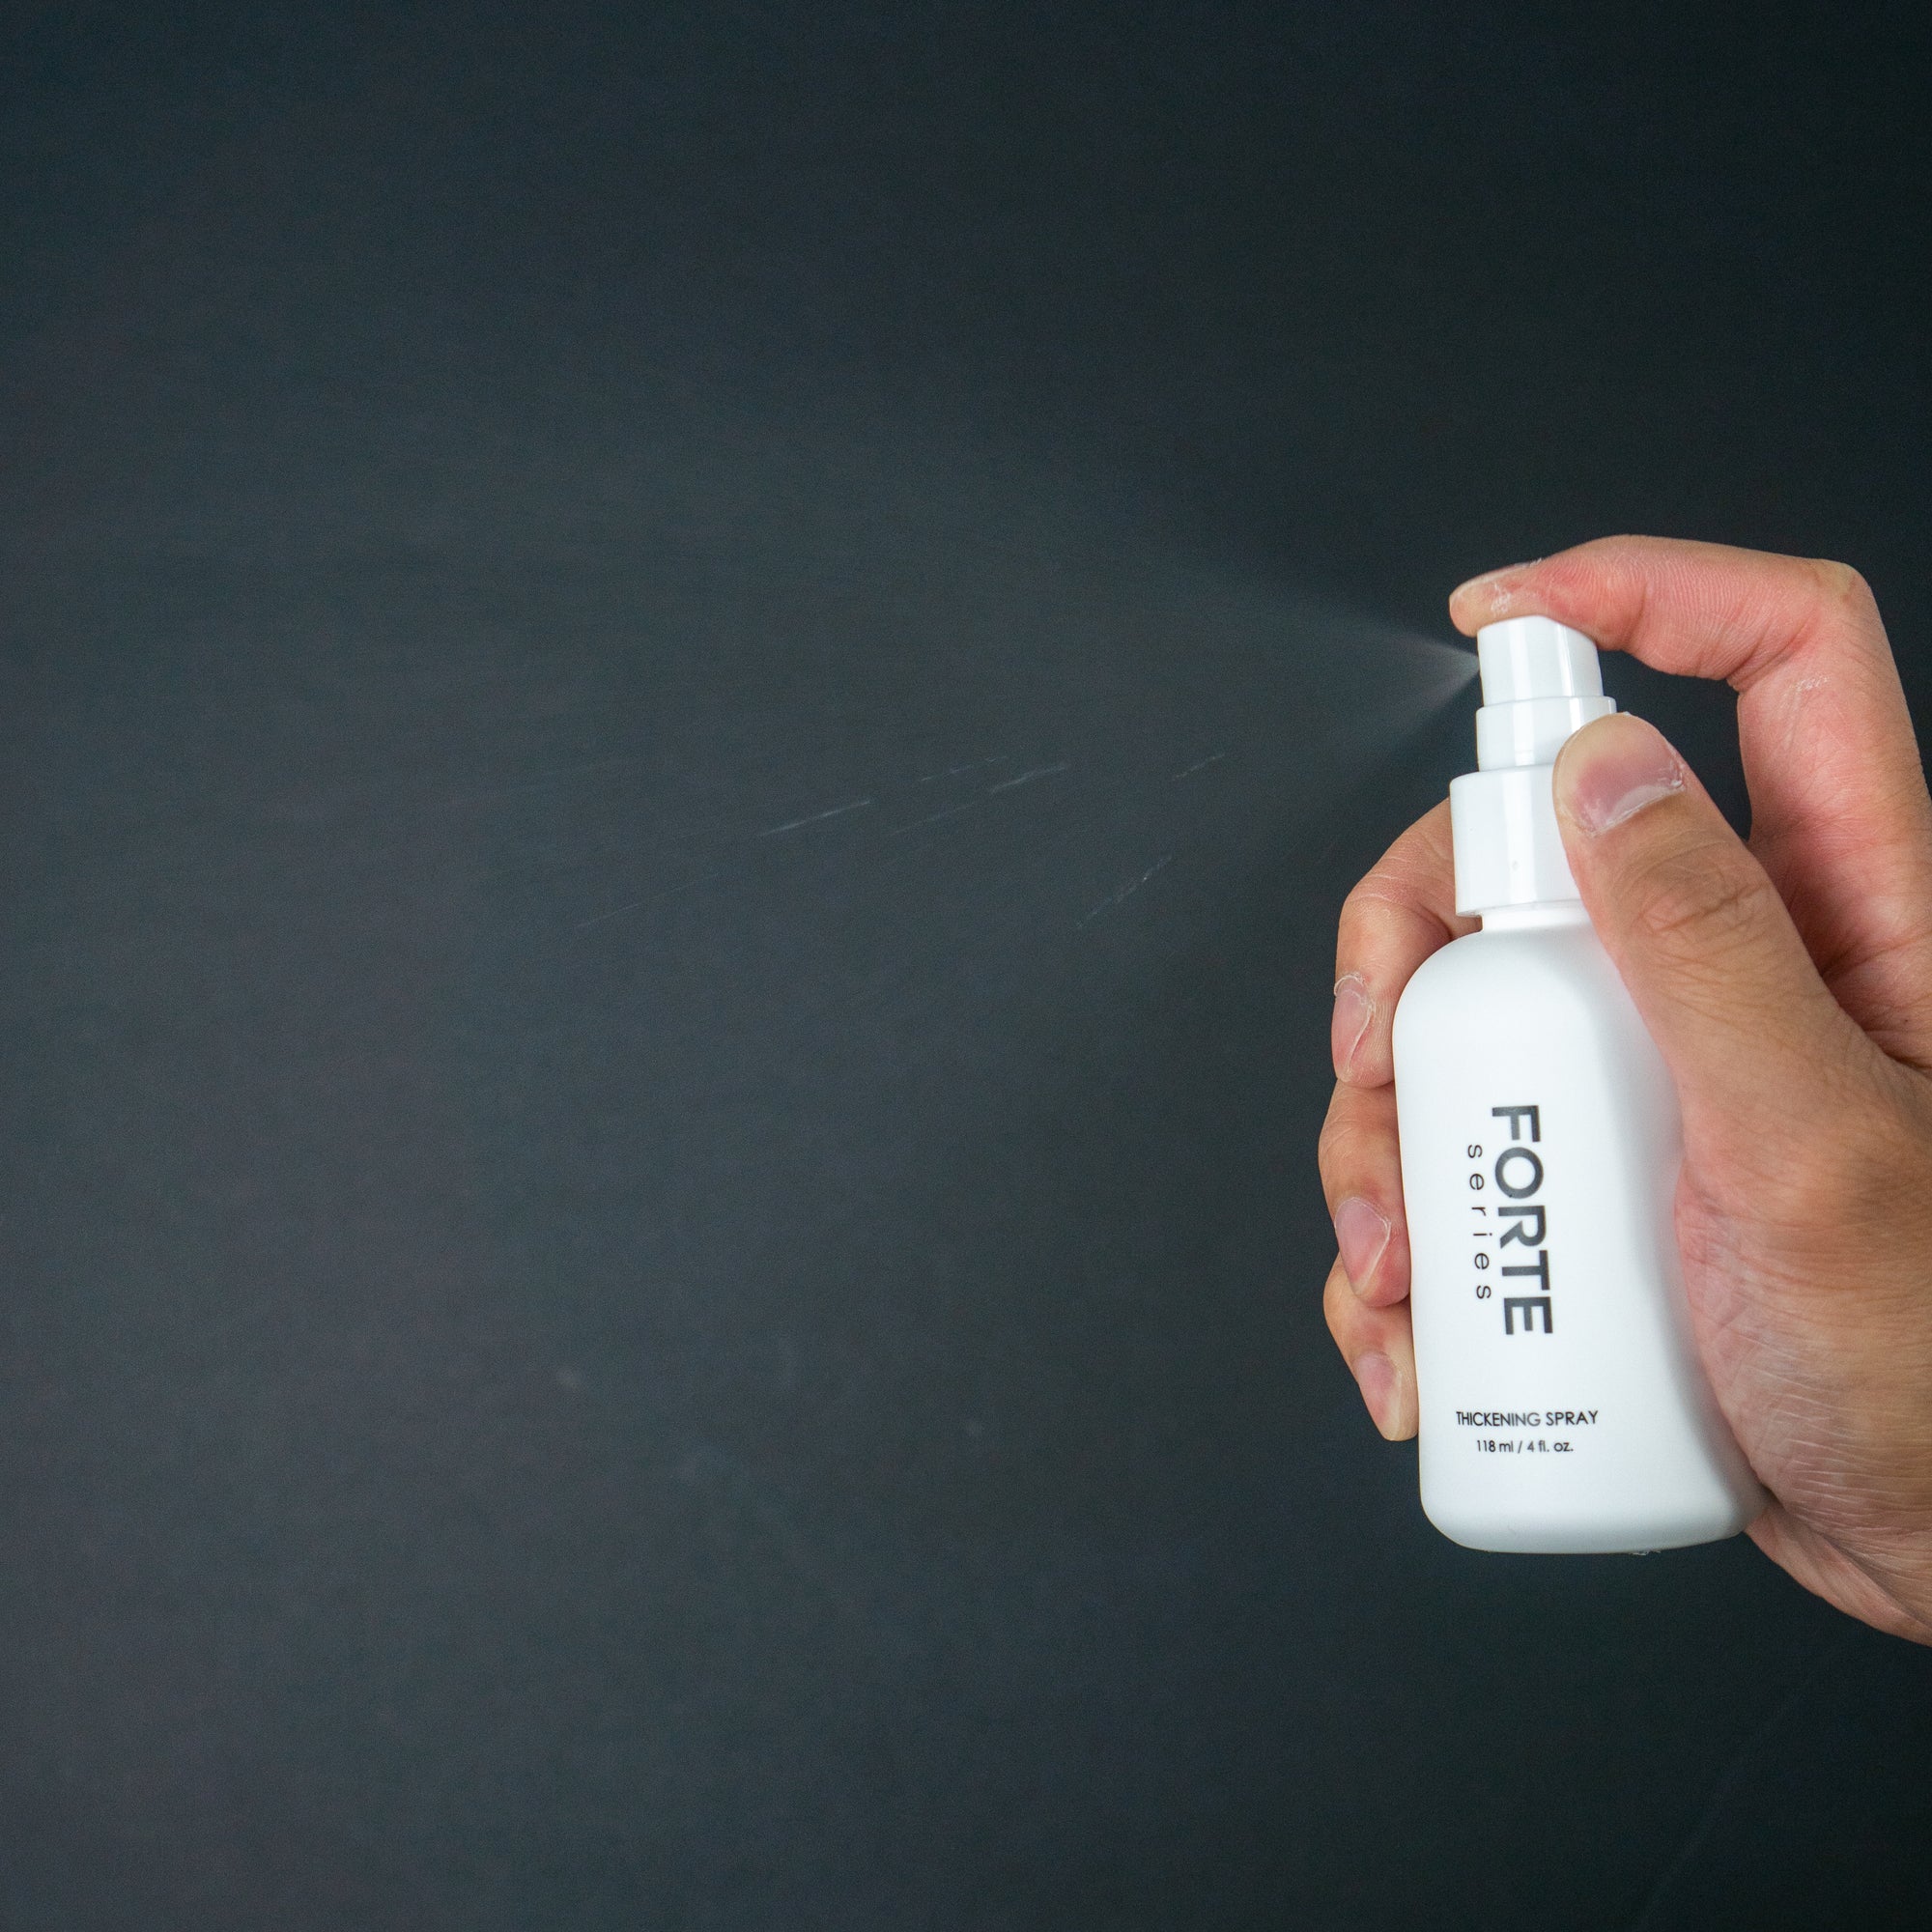 A hand holding a Forte Series Hair Thickening Spray, providing oil absorbing benefits for denser-looking head of hair with added body and volume, against a black background, by KirbyAllison.com.